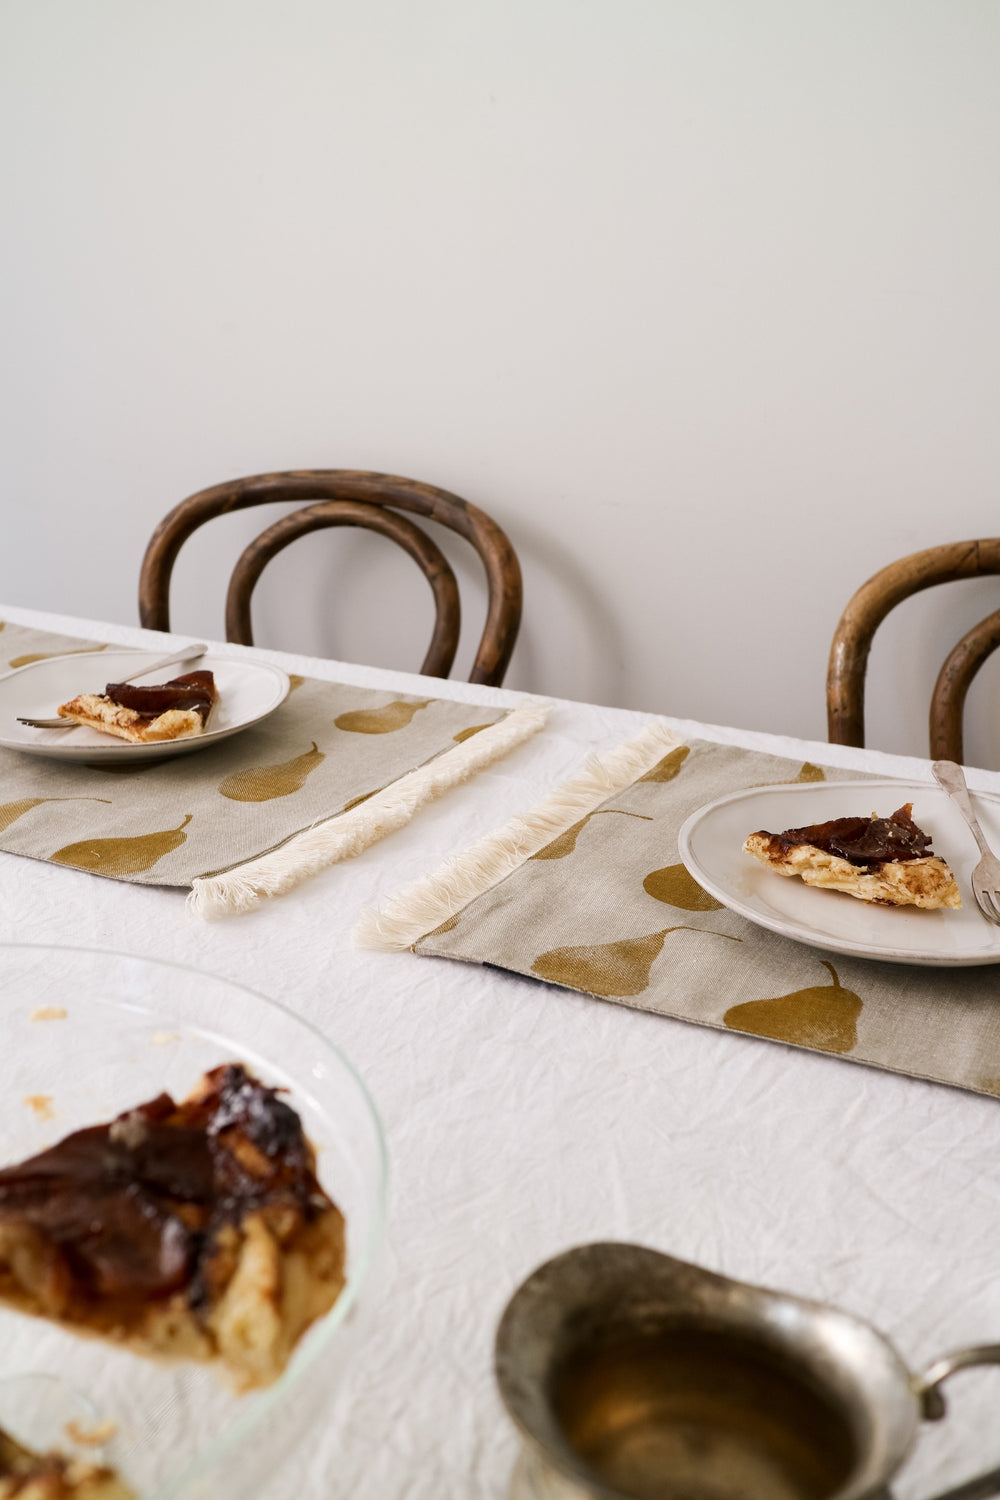 Raine & Humble | Pear Placemat - Mustard | Shut the Front Door